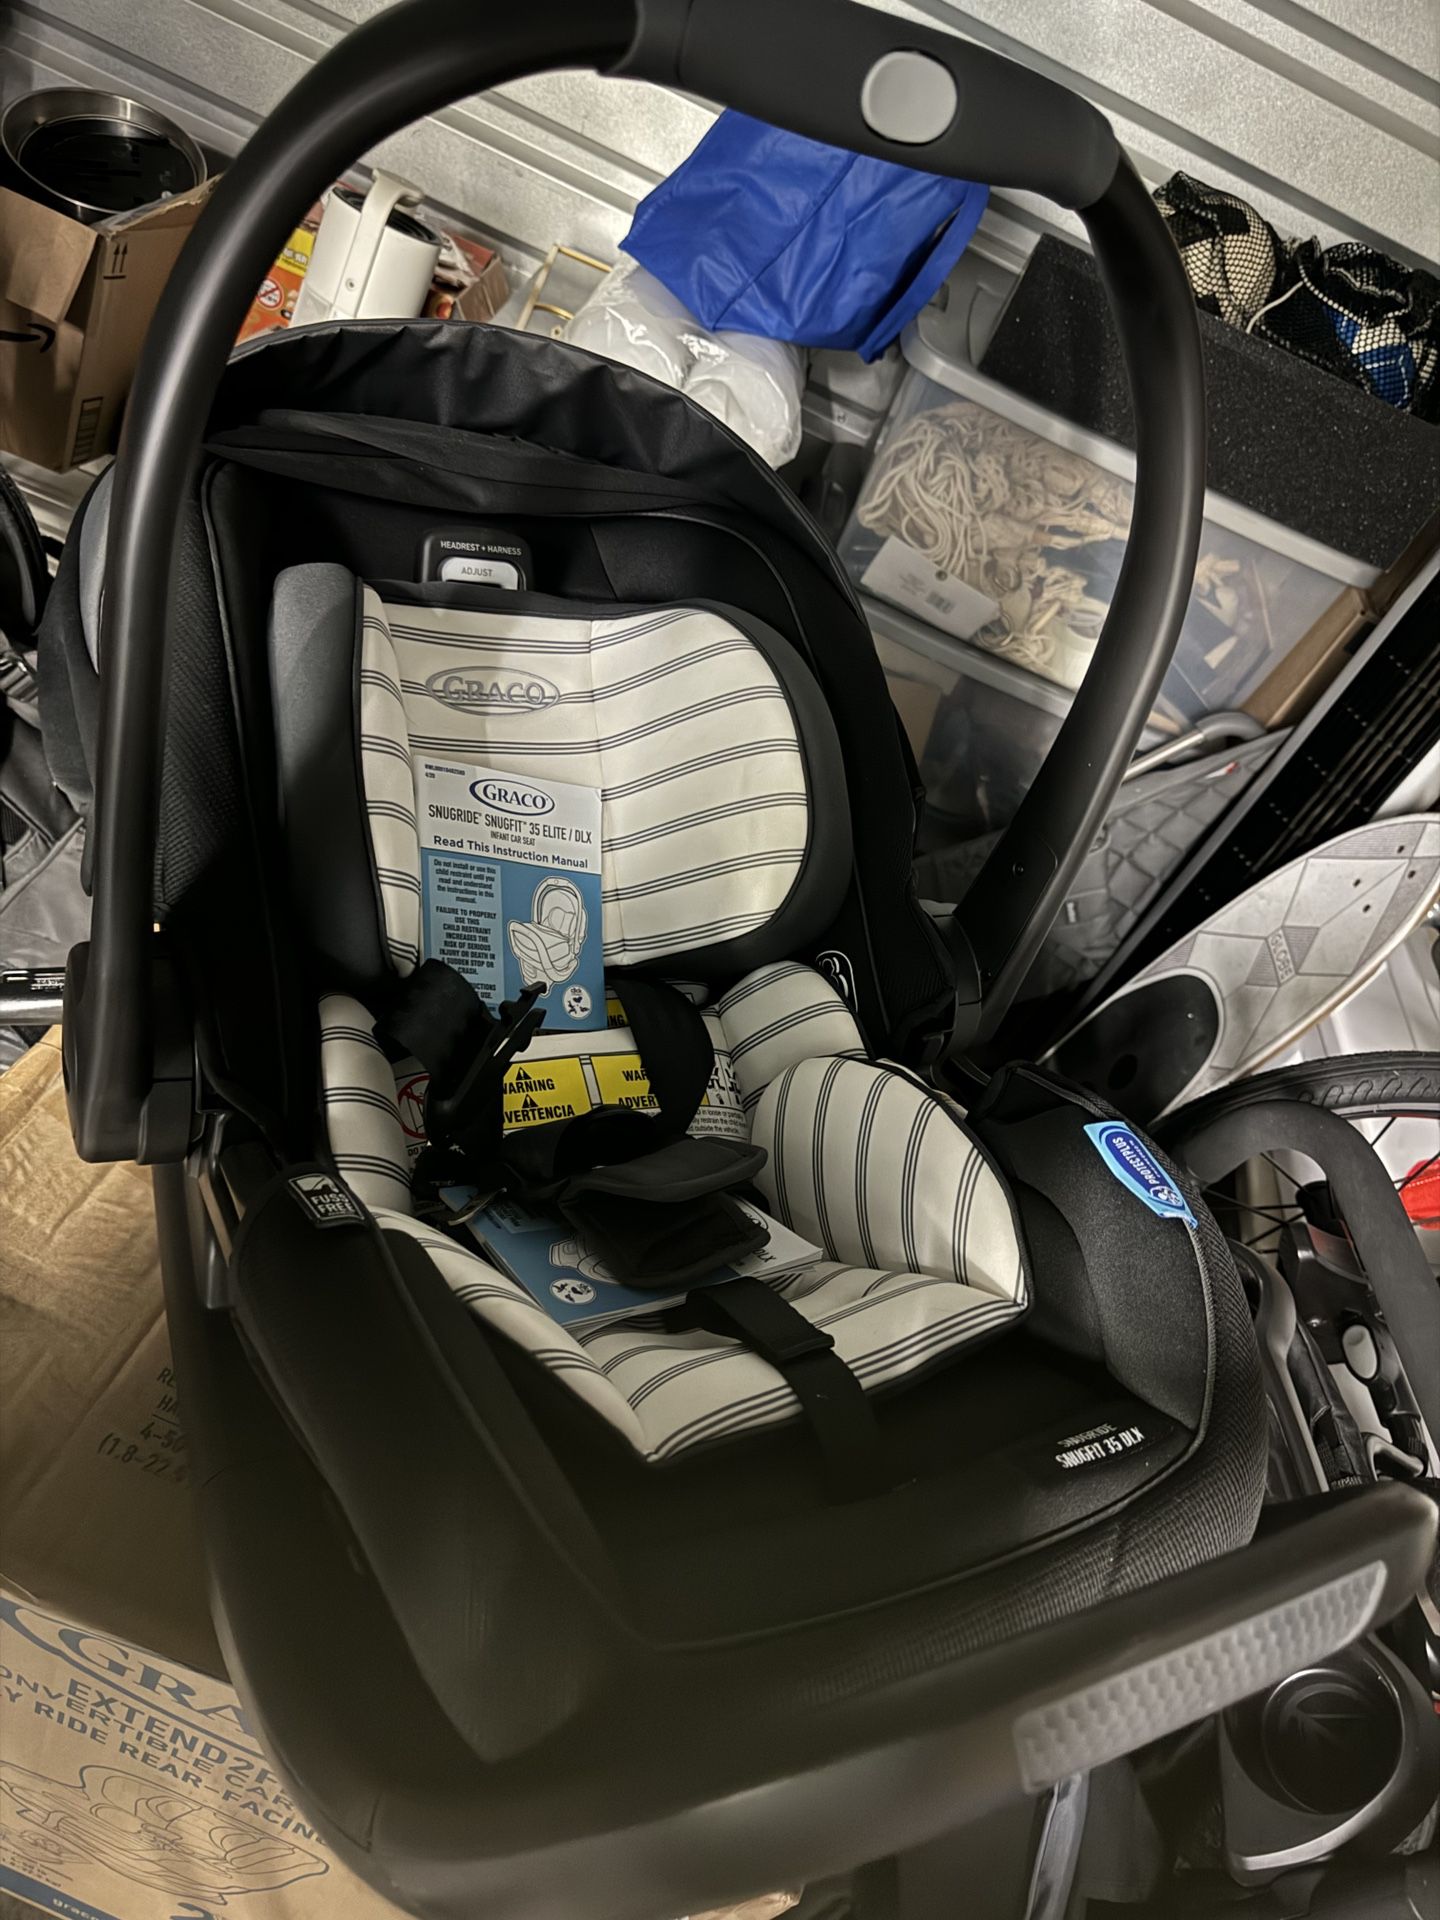 Brand New Infant Car Seat (Never Used)